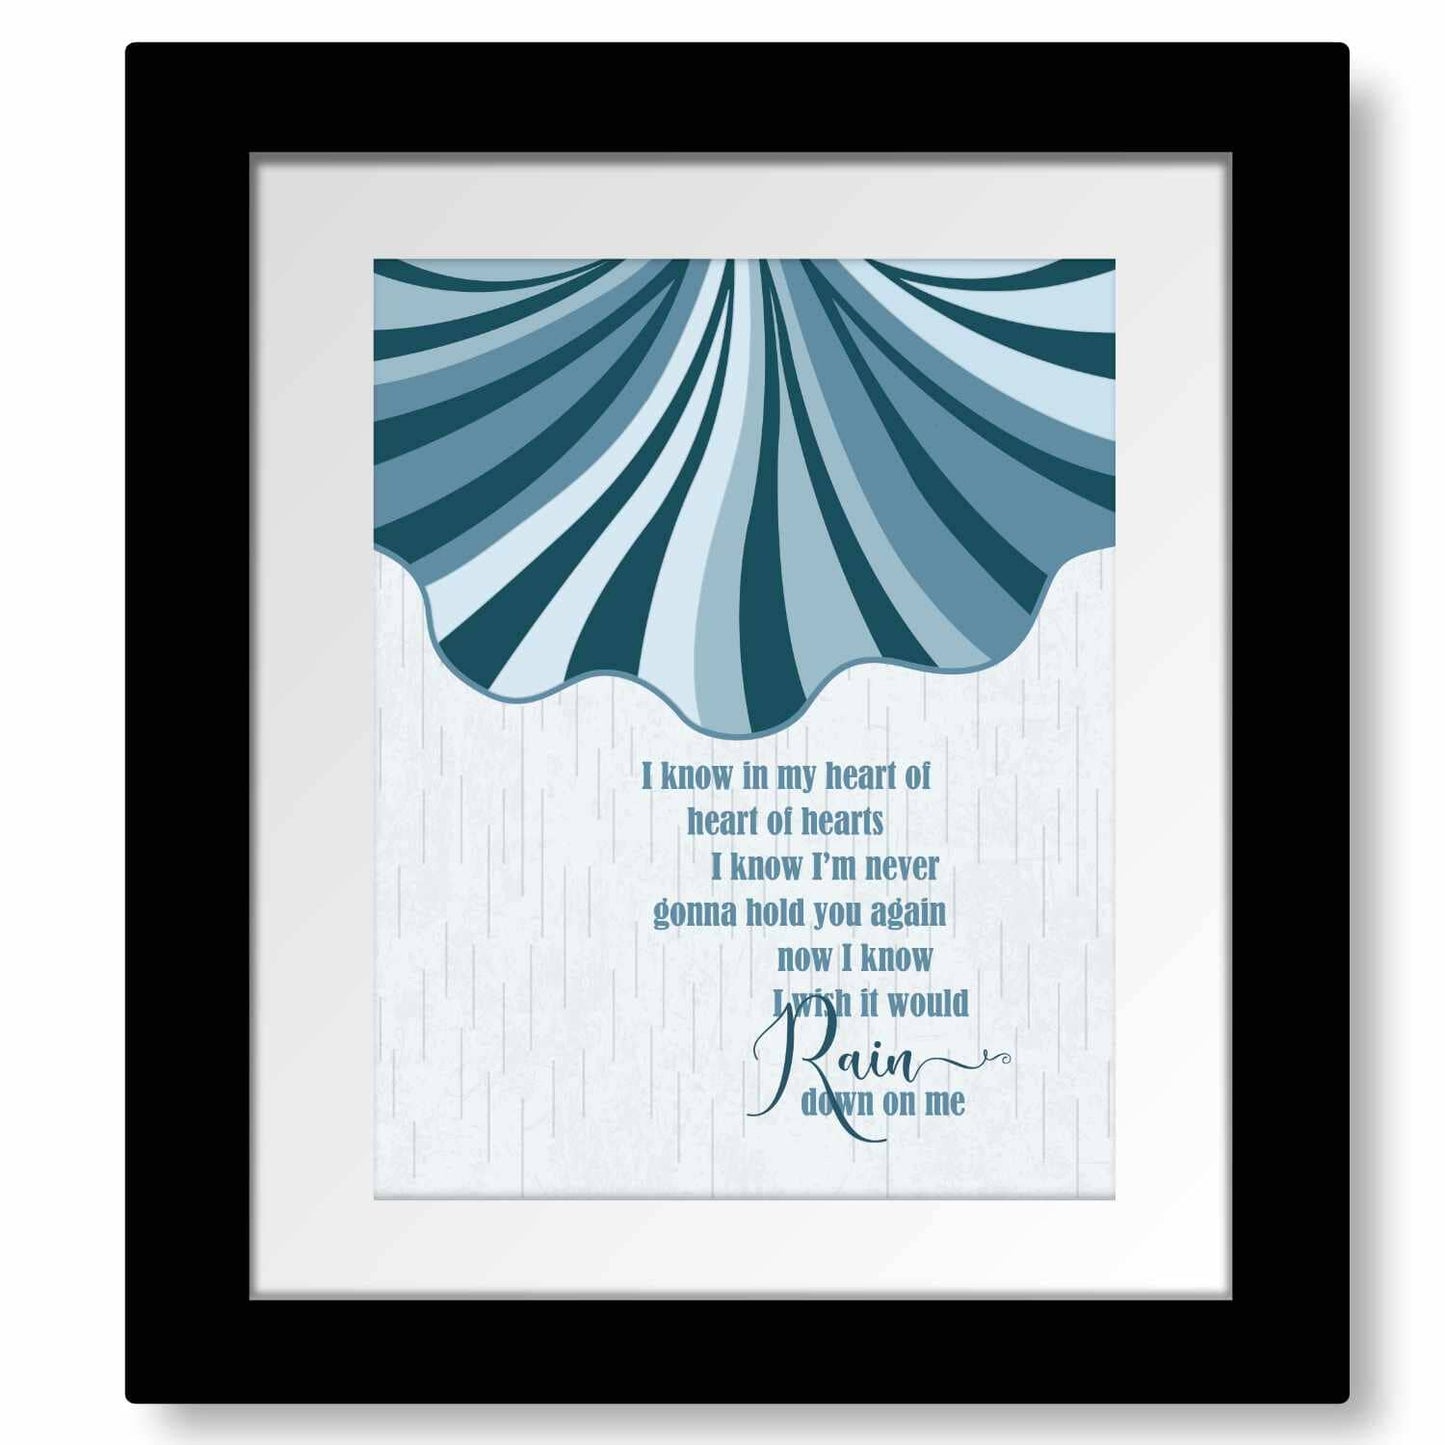 I Wish it Would Rain Down by Phil Collins - Song Lyric Poster Song Lyrics Art Song Lyrics Art 8x10 Matted and Framed Print 